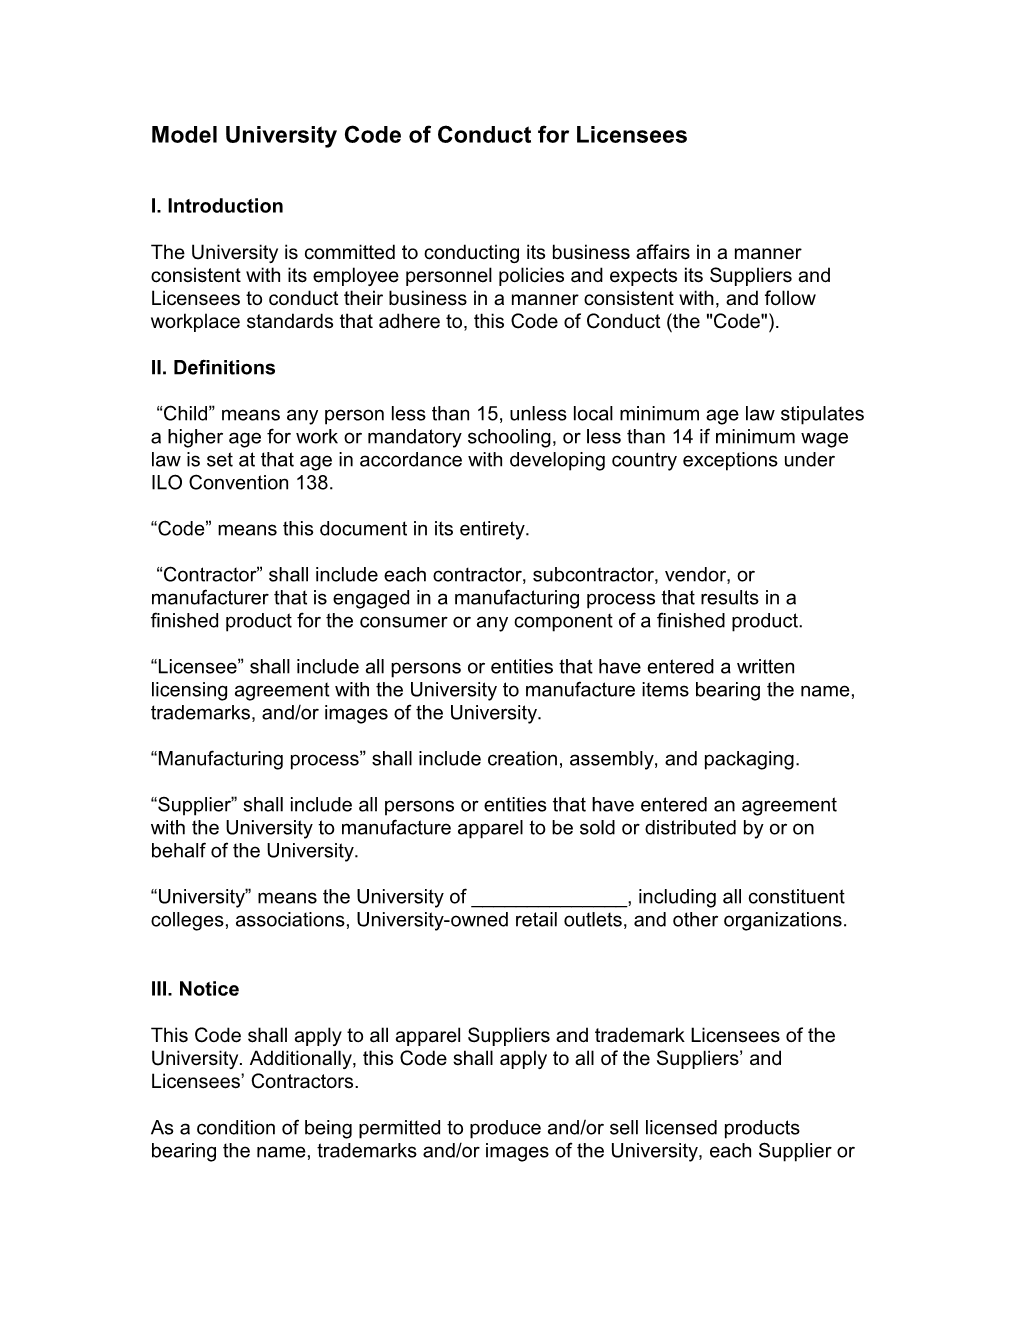 University of Toronto Code of Conduct for Licensees